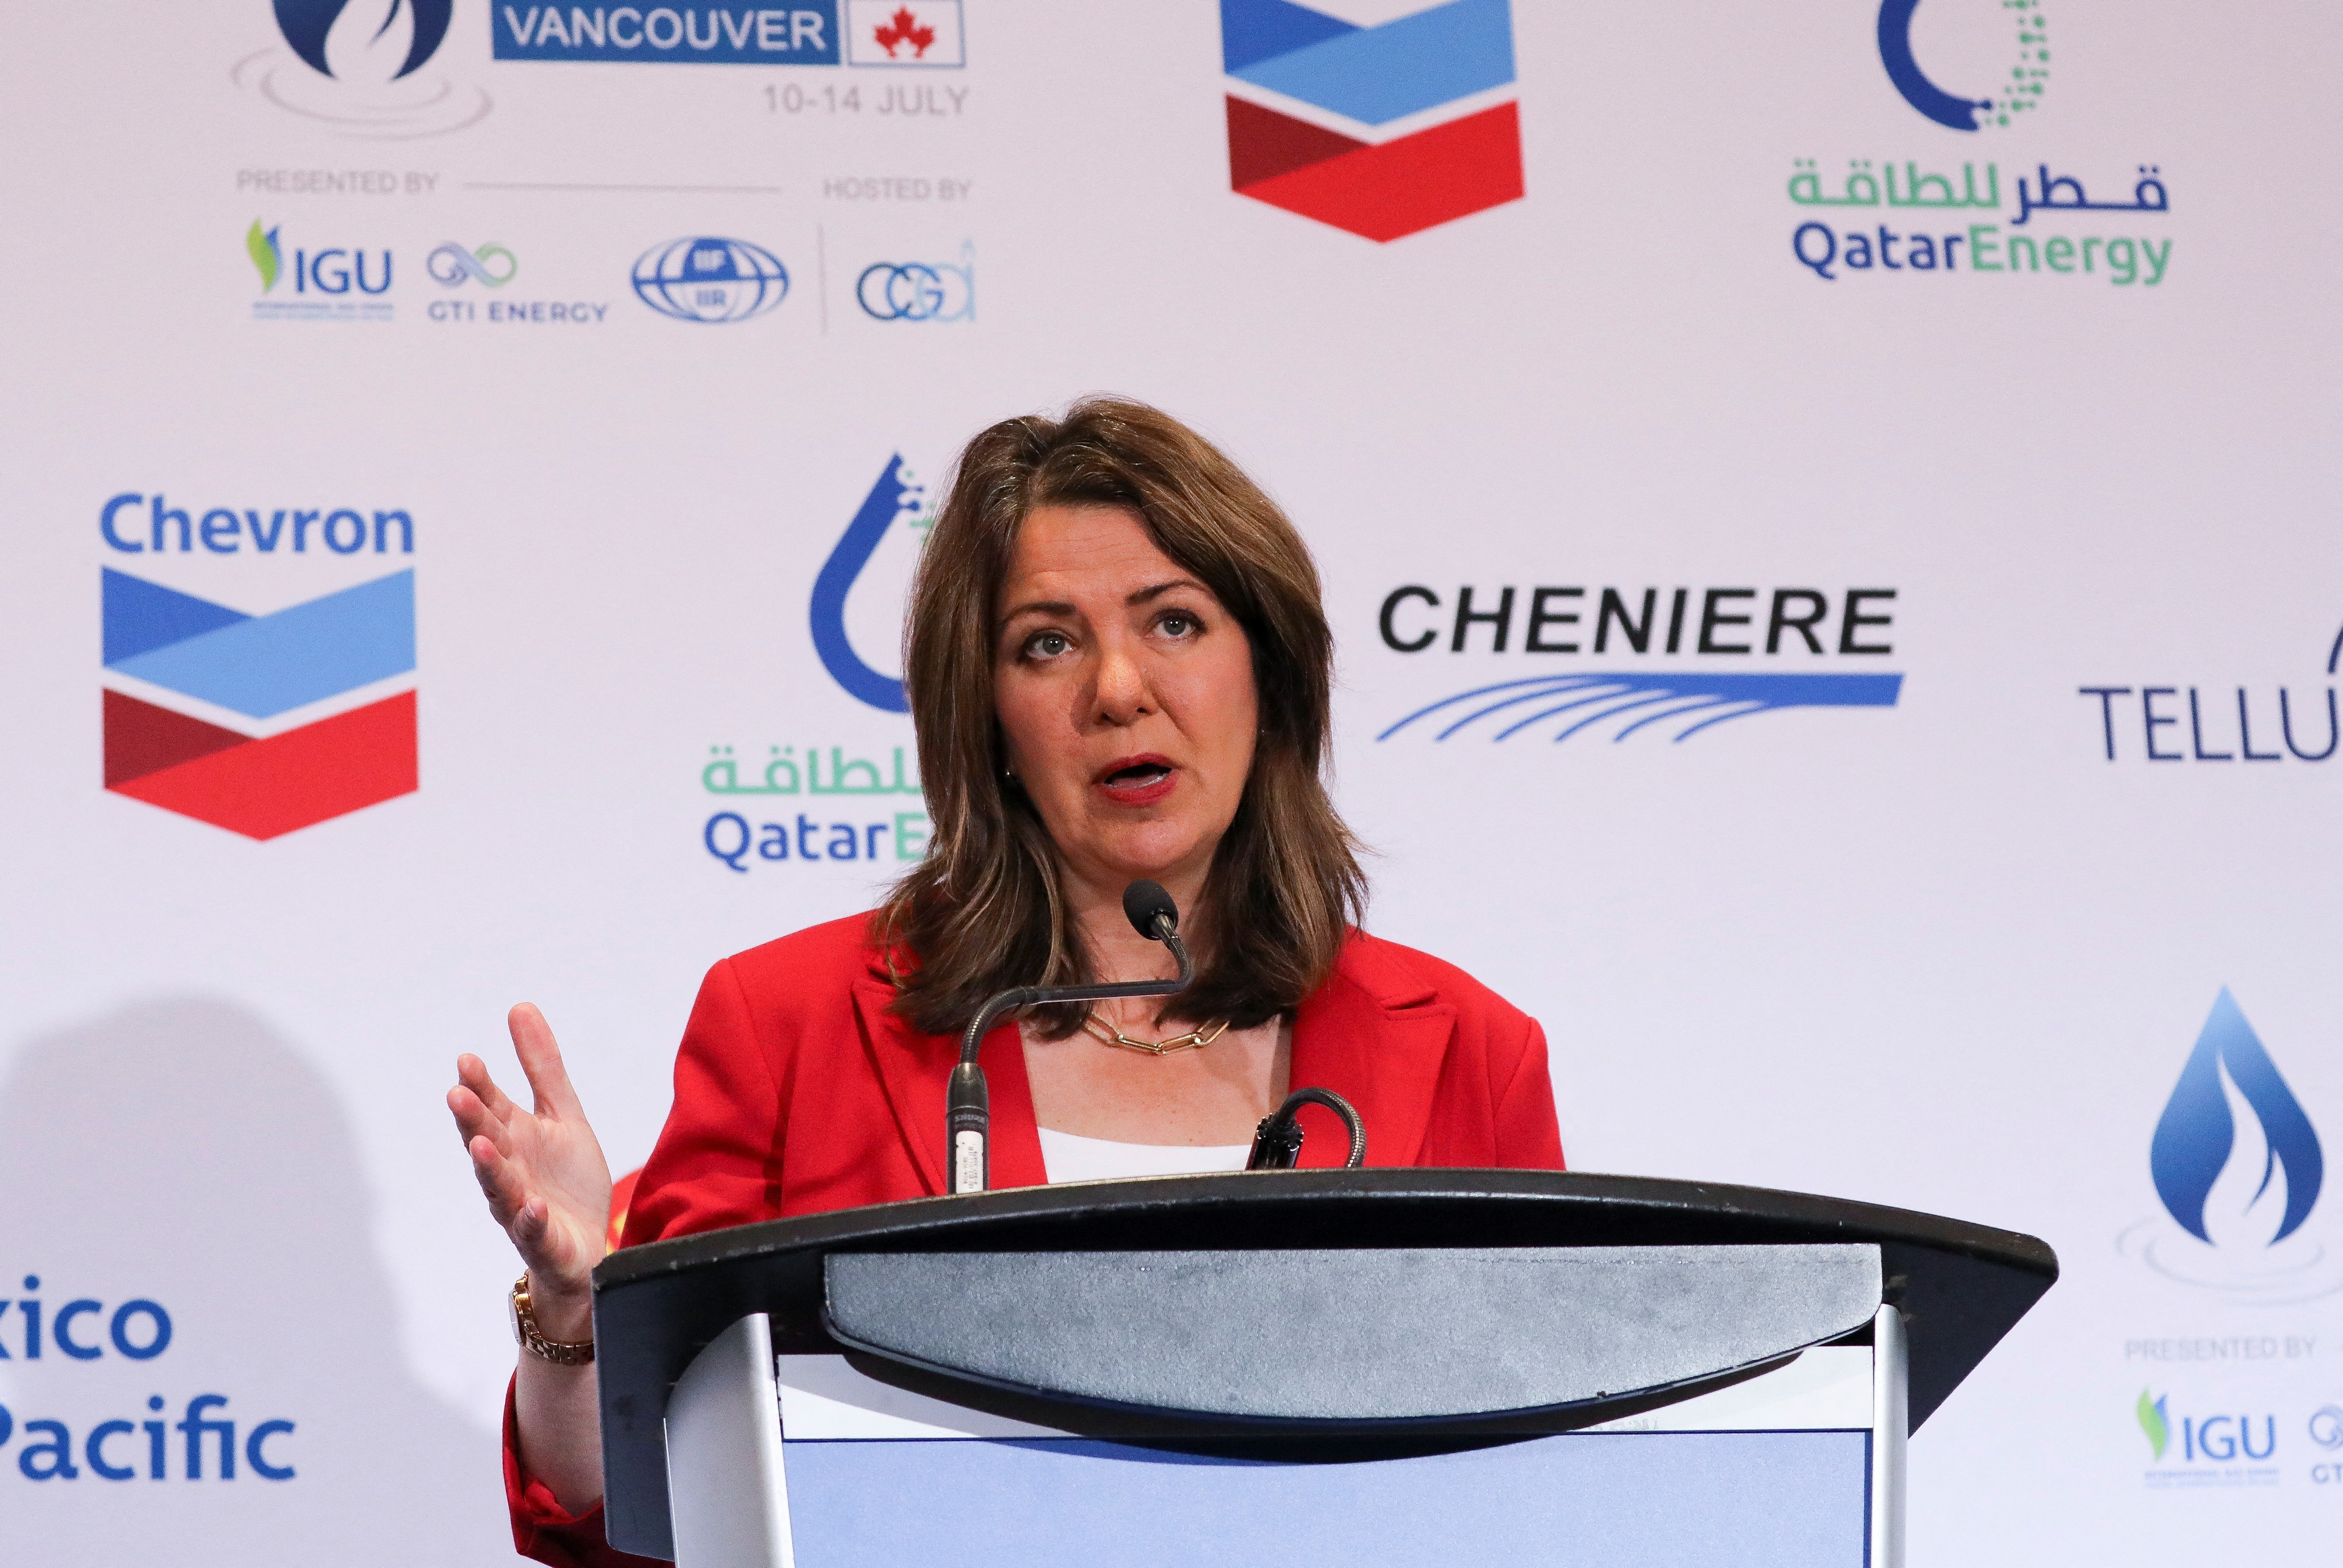 Alberta's Premier Danielle Smith speaks during a press conference at the LNG 2023 energy conference in Vancouver, British Columbia, Canada July 13, 2023. REUTERS/Chris Helgren/File Photo